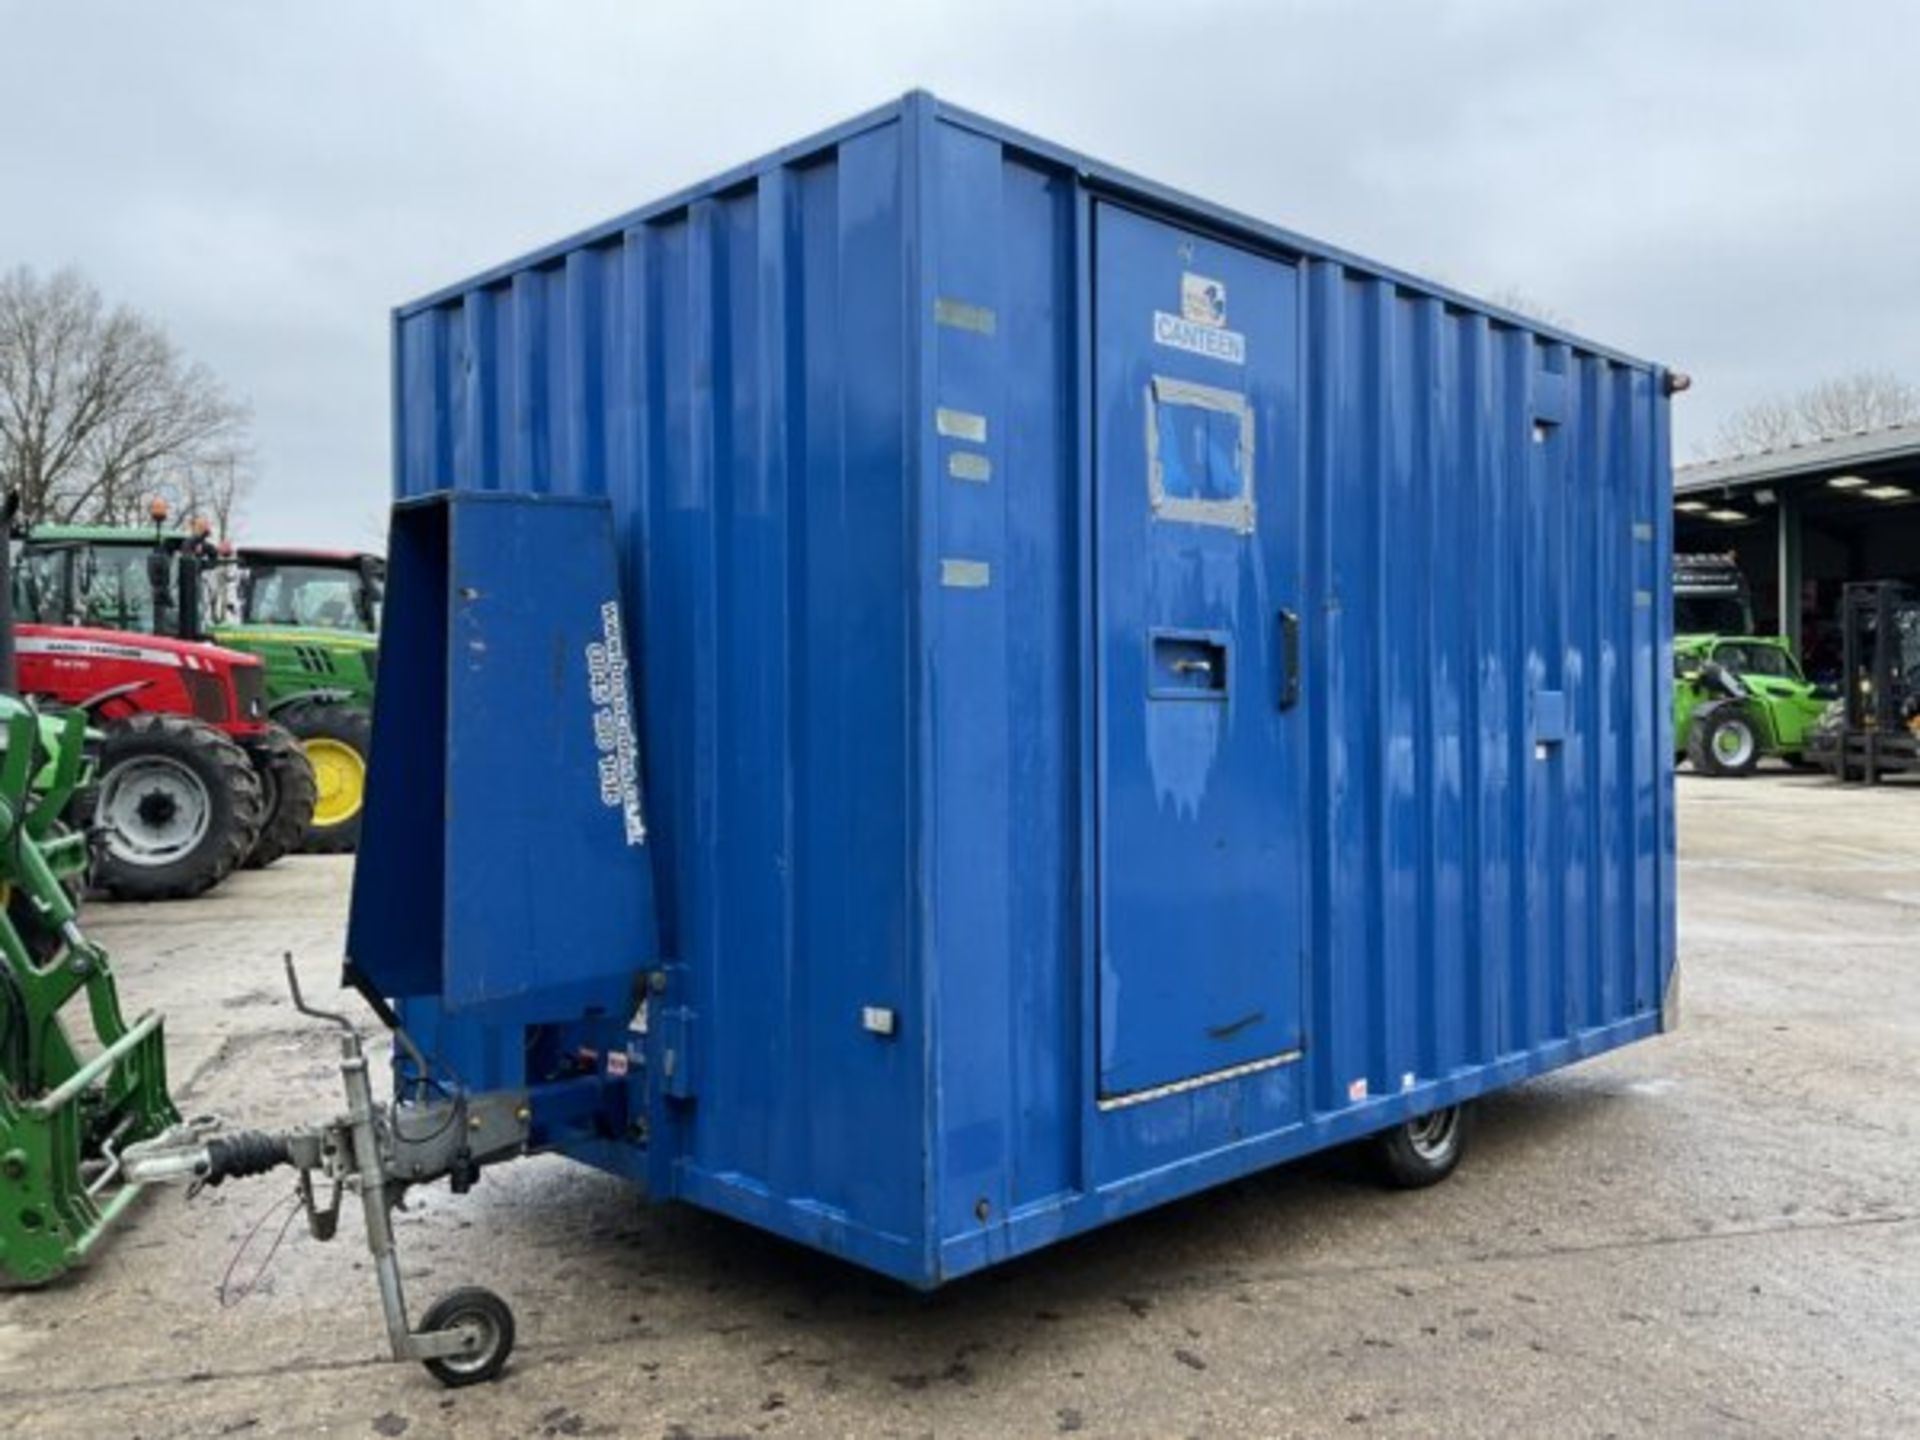 BOSS CABIN WELFARE UNIT WITH KITCHEN/DINING AREA, W/C, AND RED BOX POWER GENERATOR